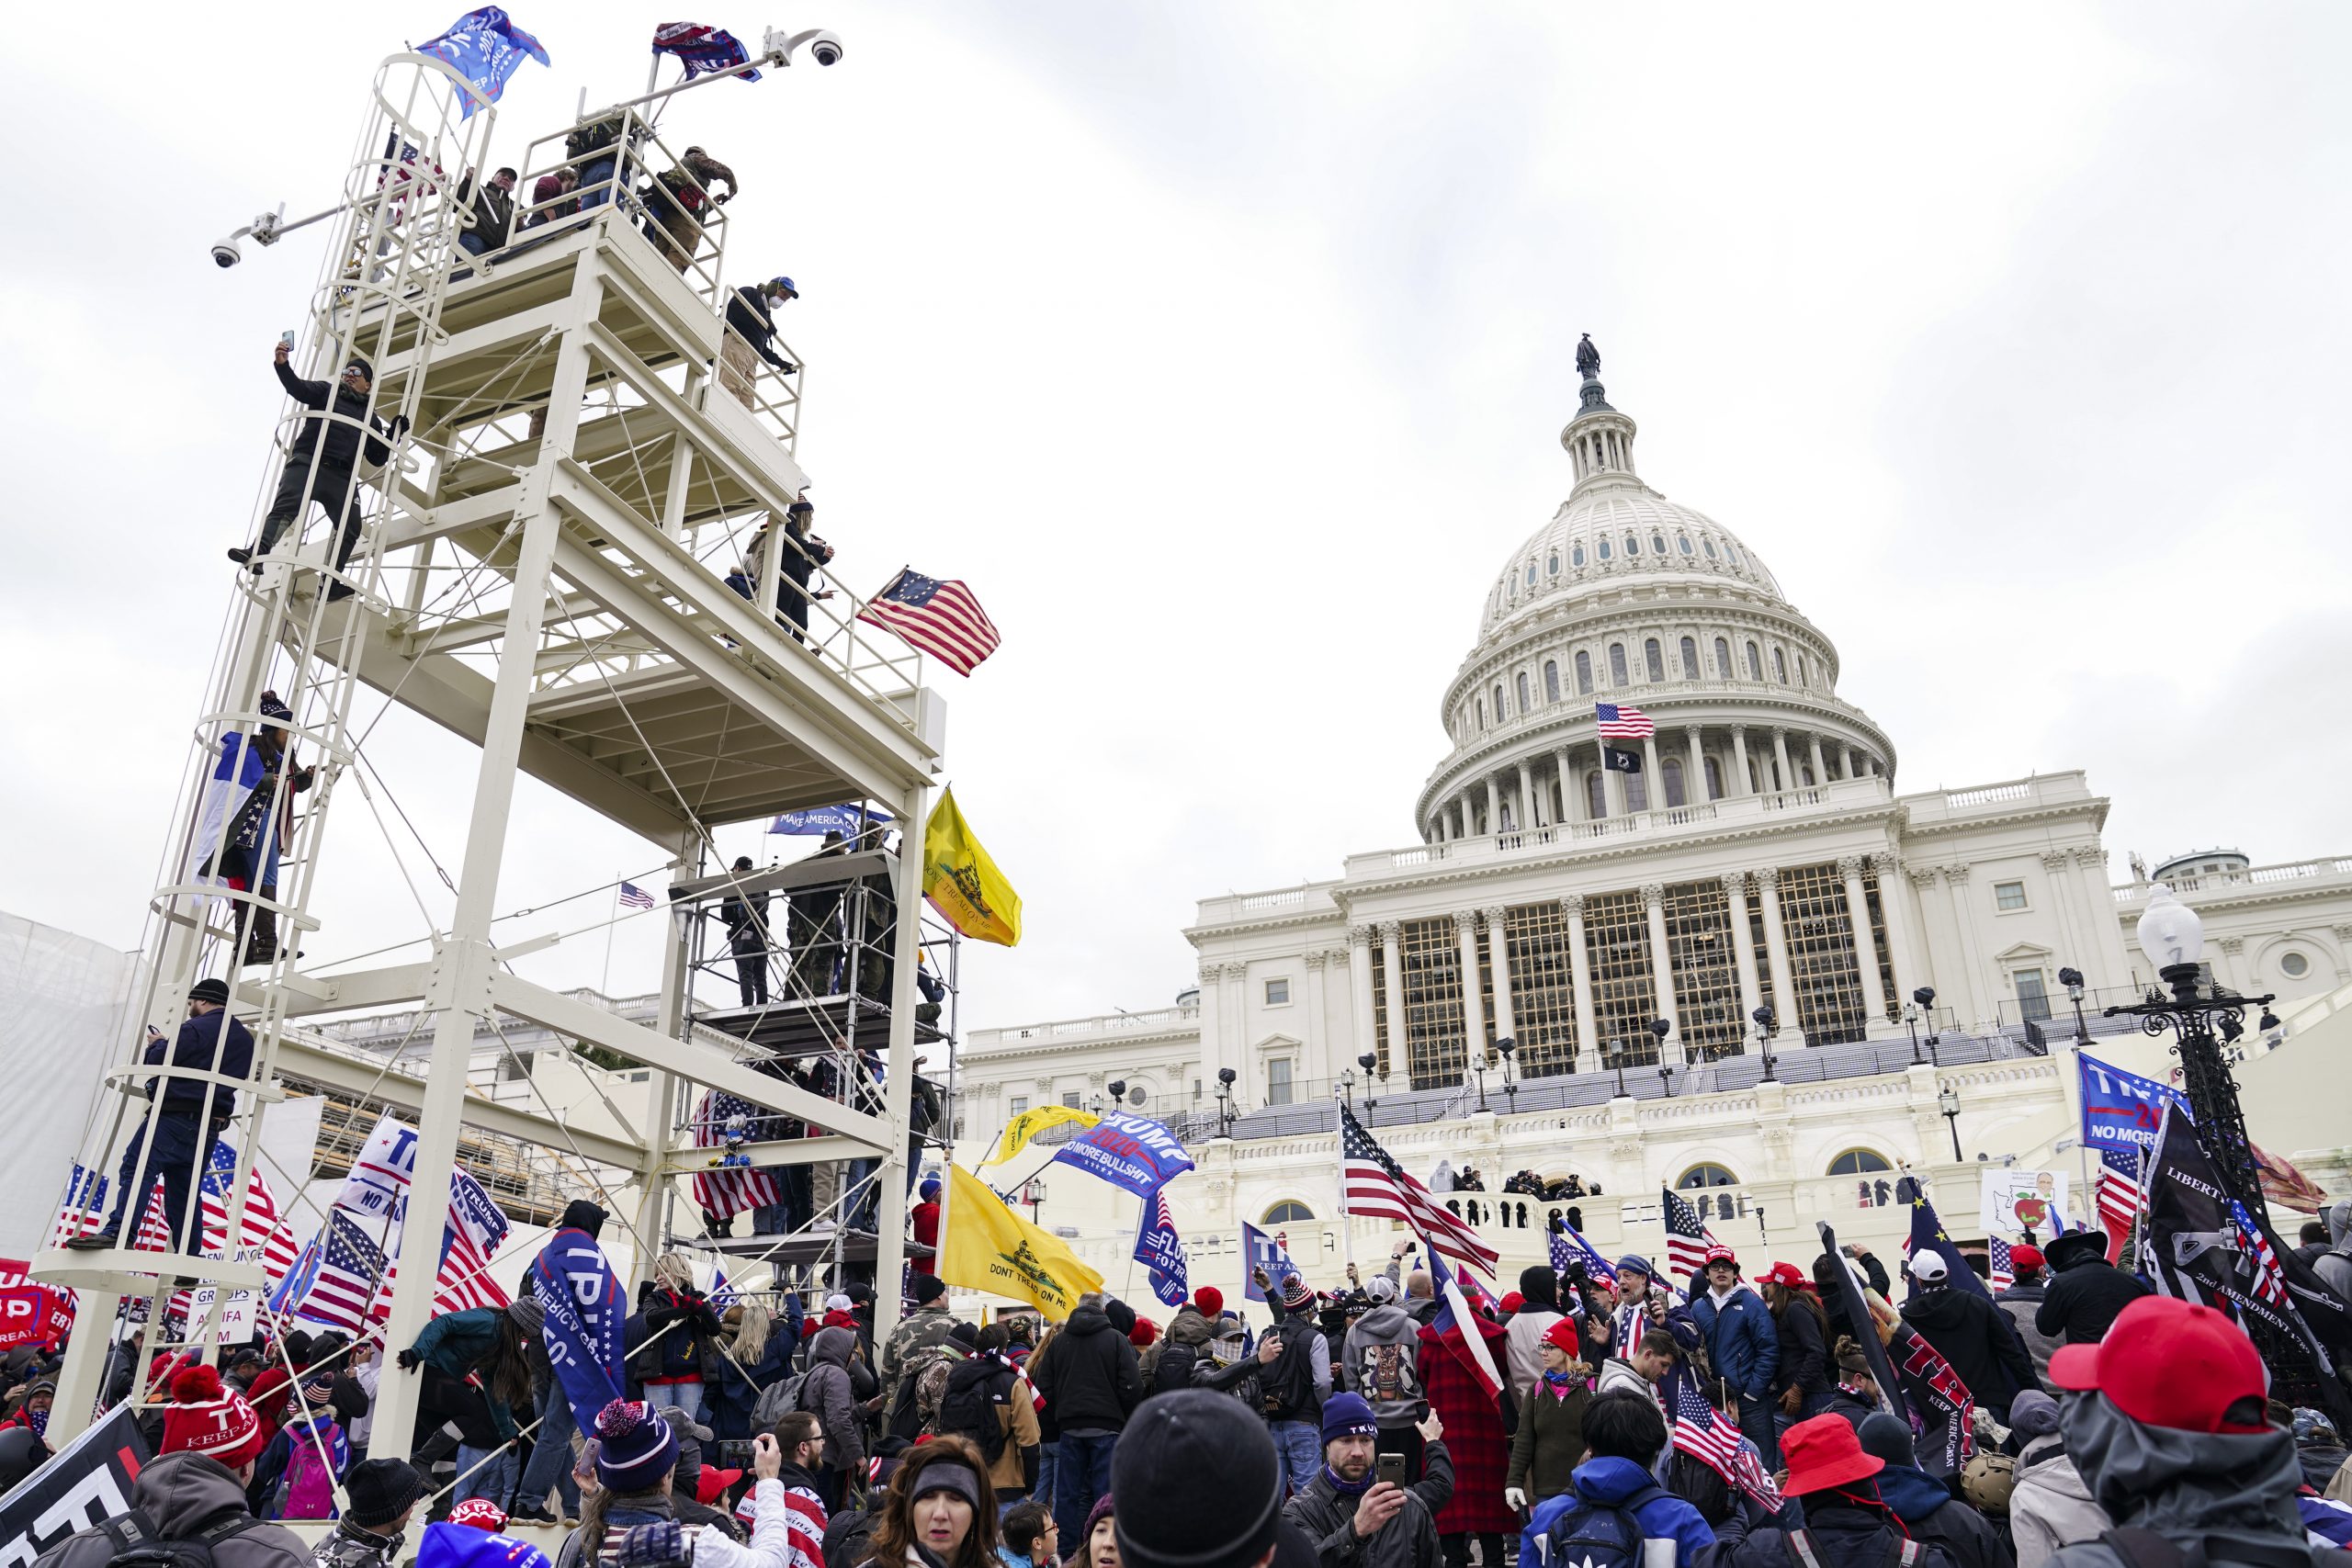 Scaffolding and demonstrators gathered at the Capitol